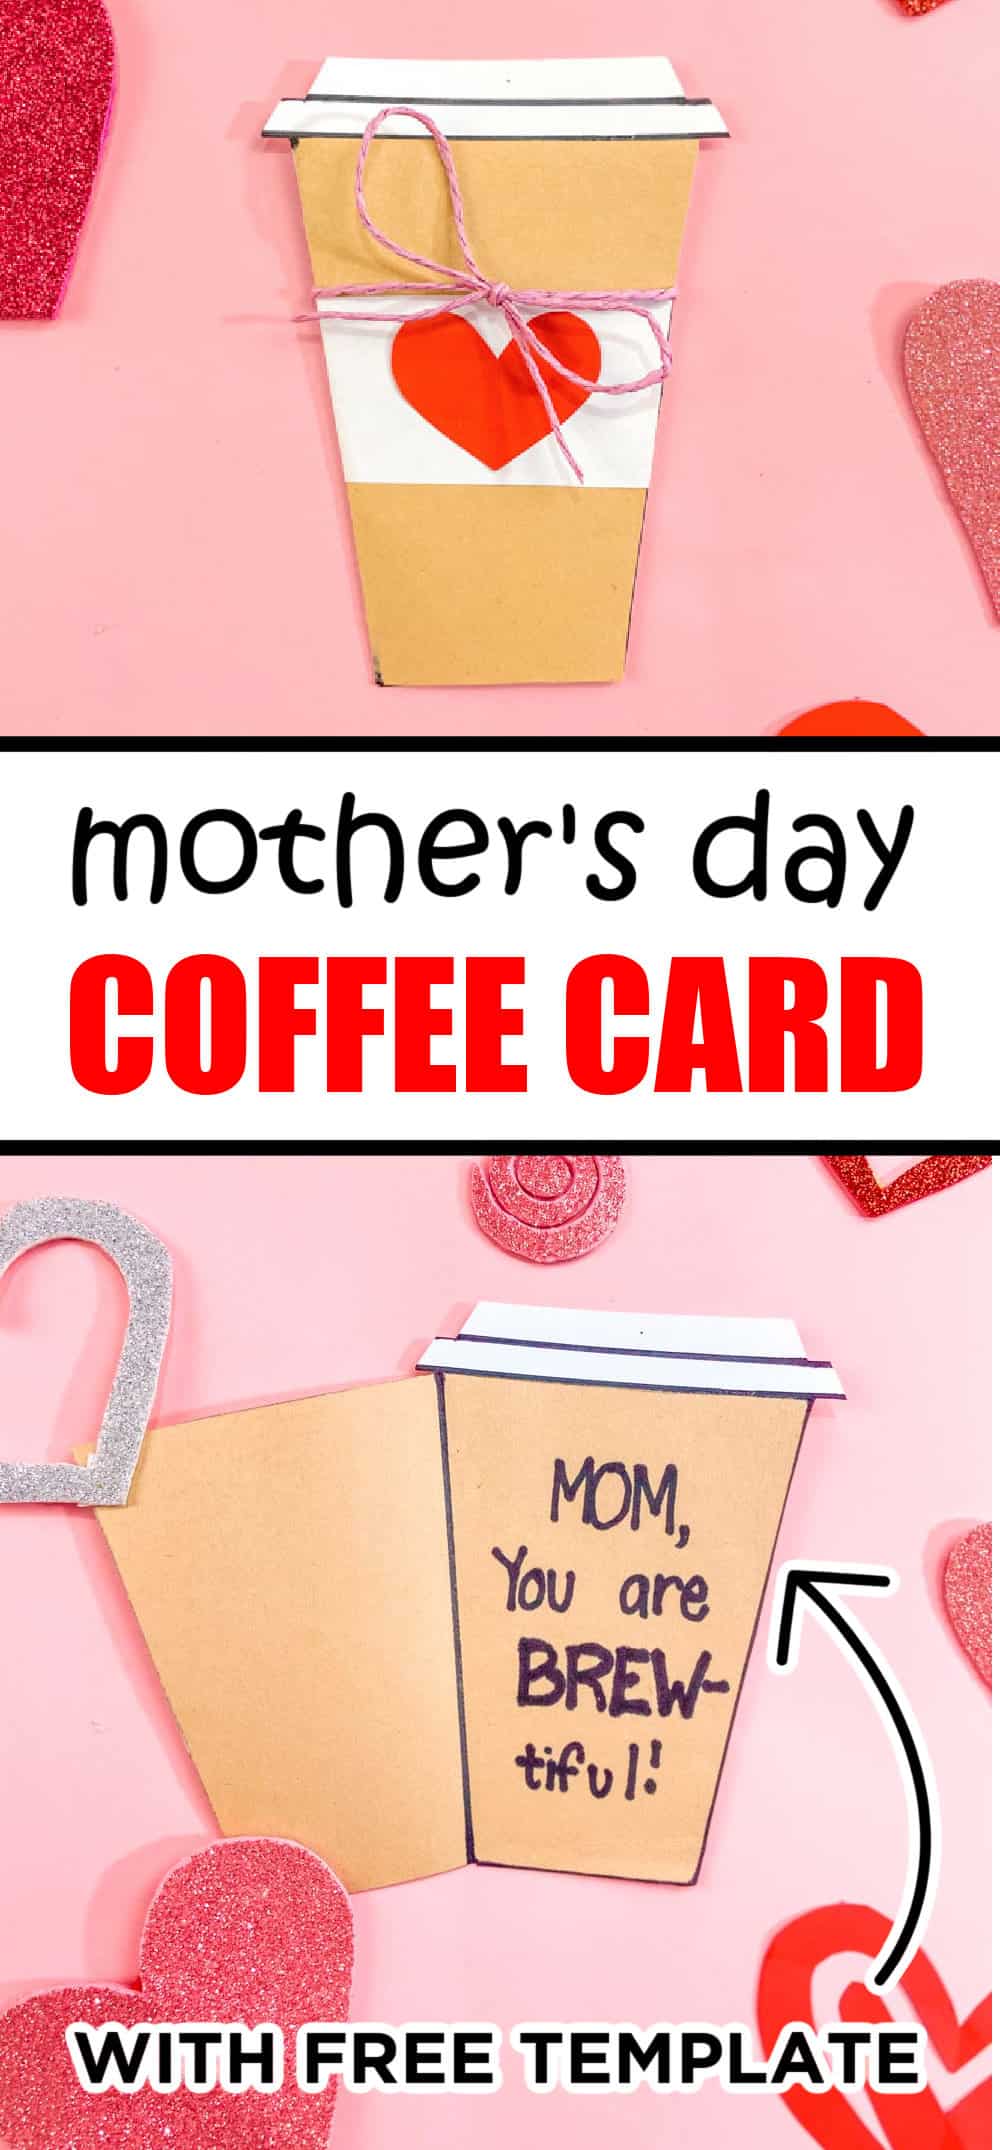 Mother's Day Coffee card free printable